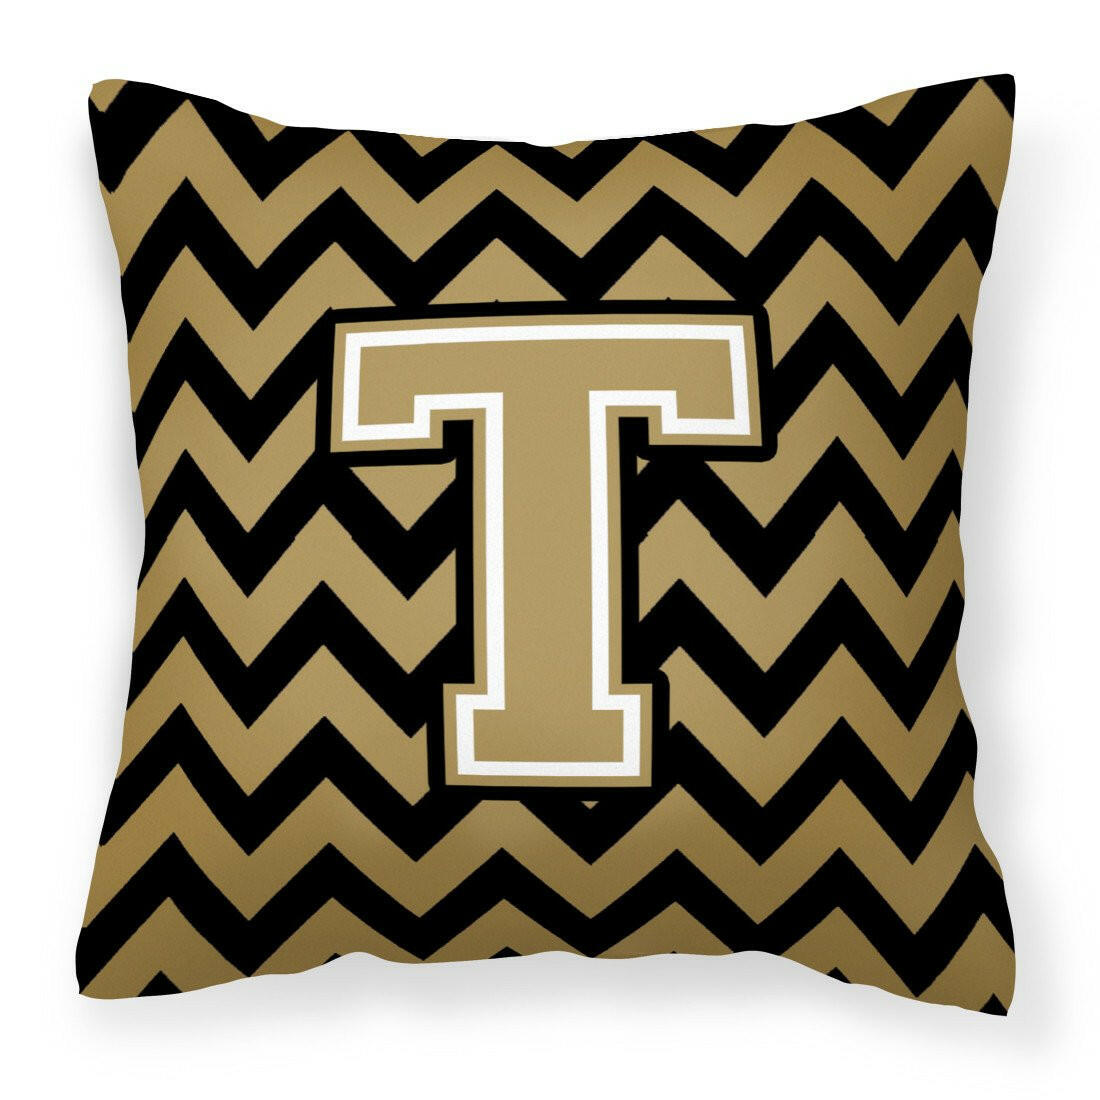 Letter T Chevron Black and Gold  Fabric Decorative Pillow CJ1050-TPW1414 by Caroline's Treasures